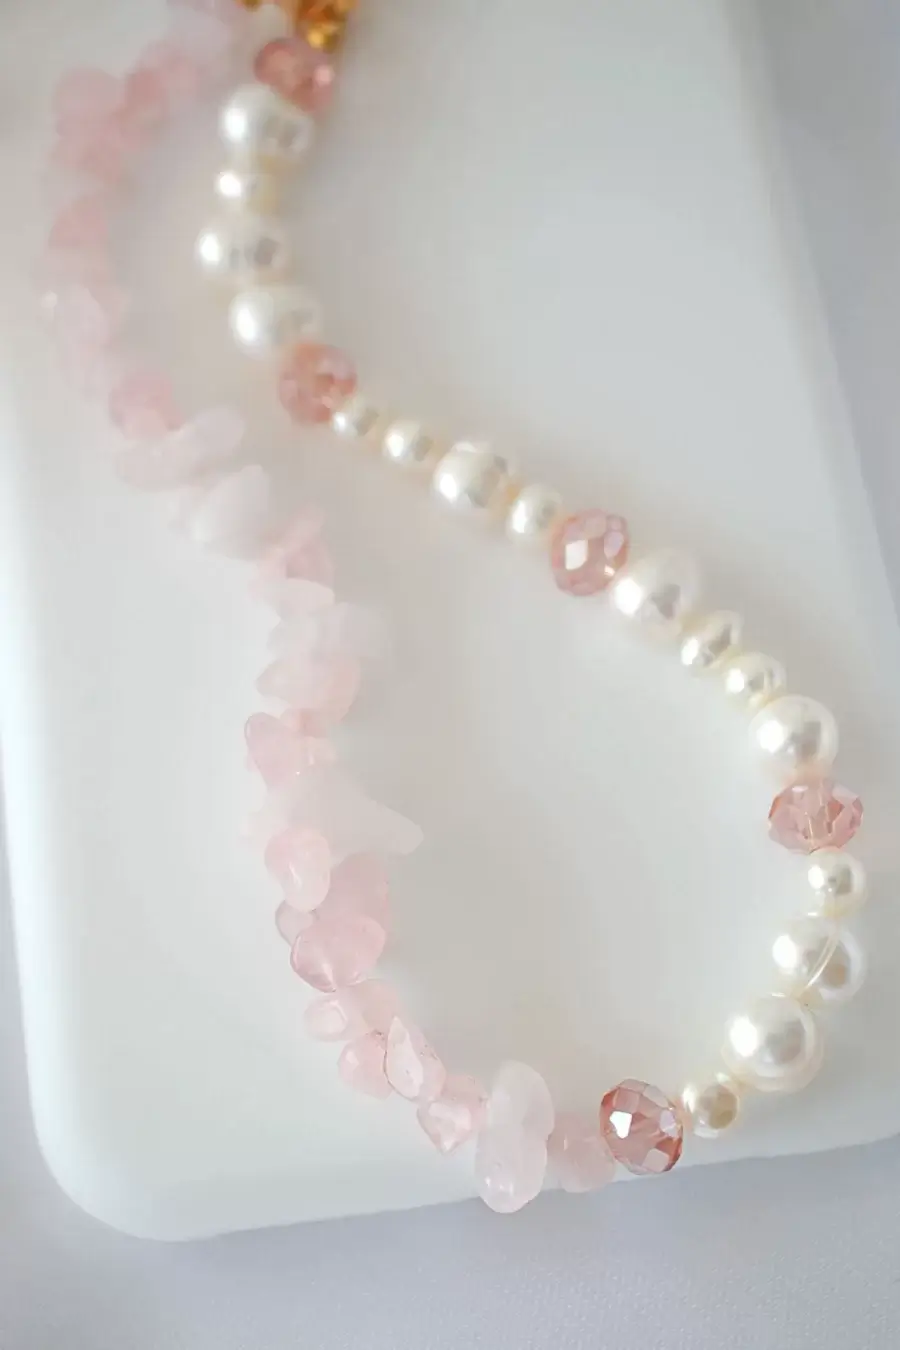 Forget-me-not Pink Freshwater Pearls Hair Clip